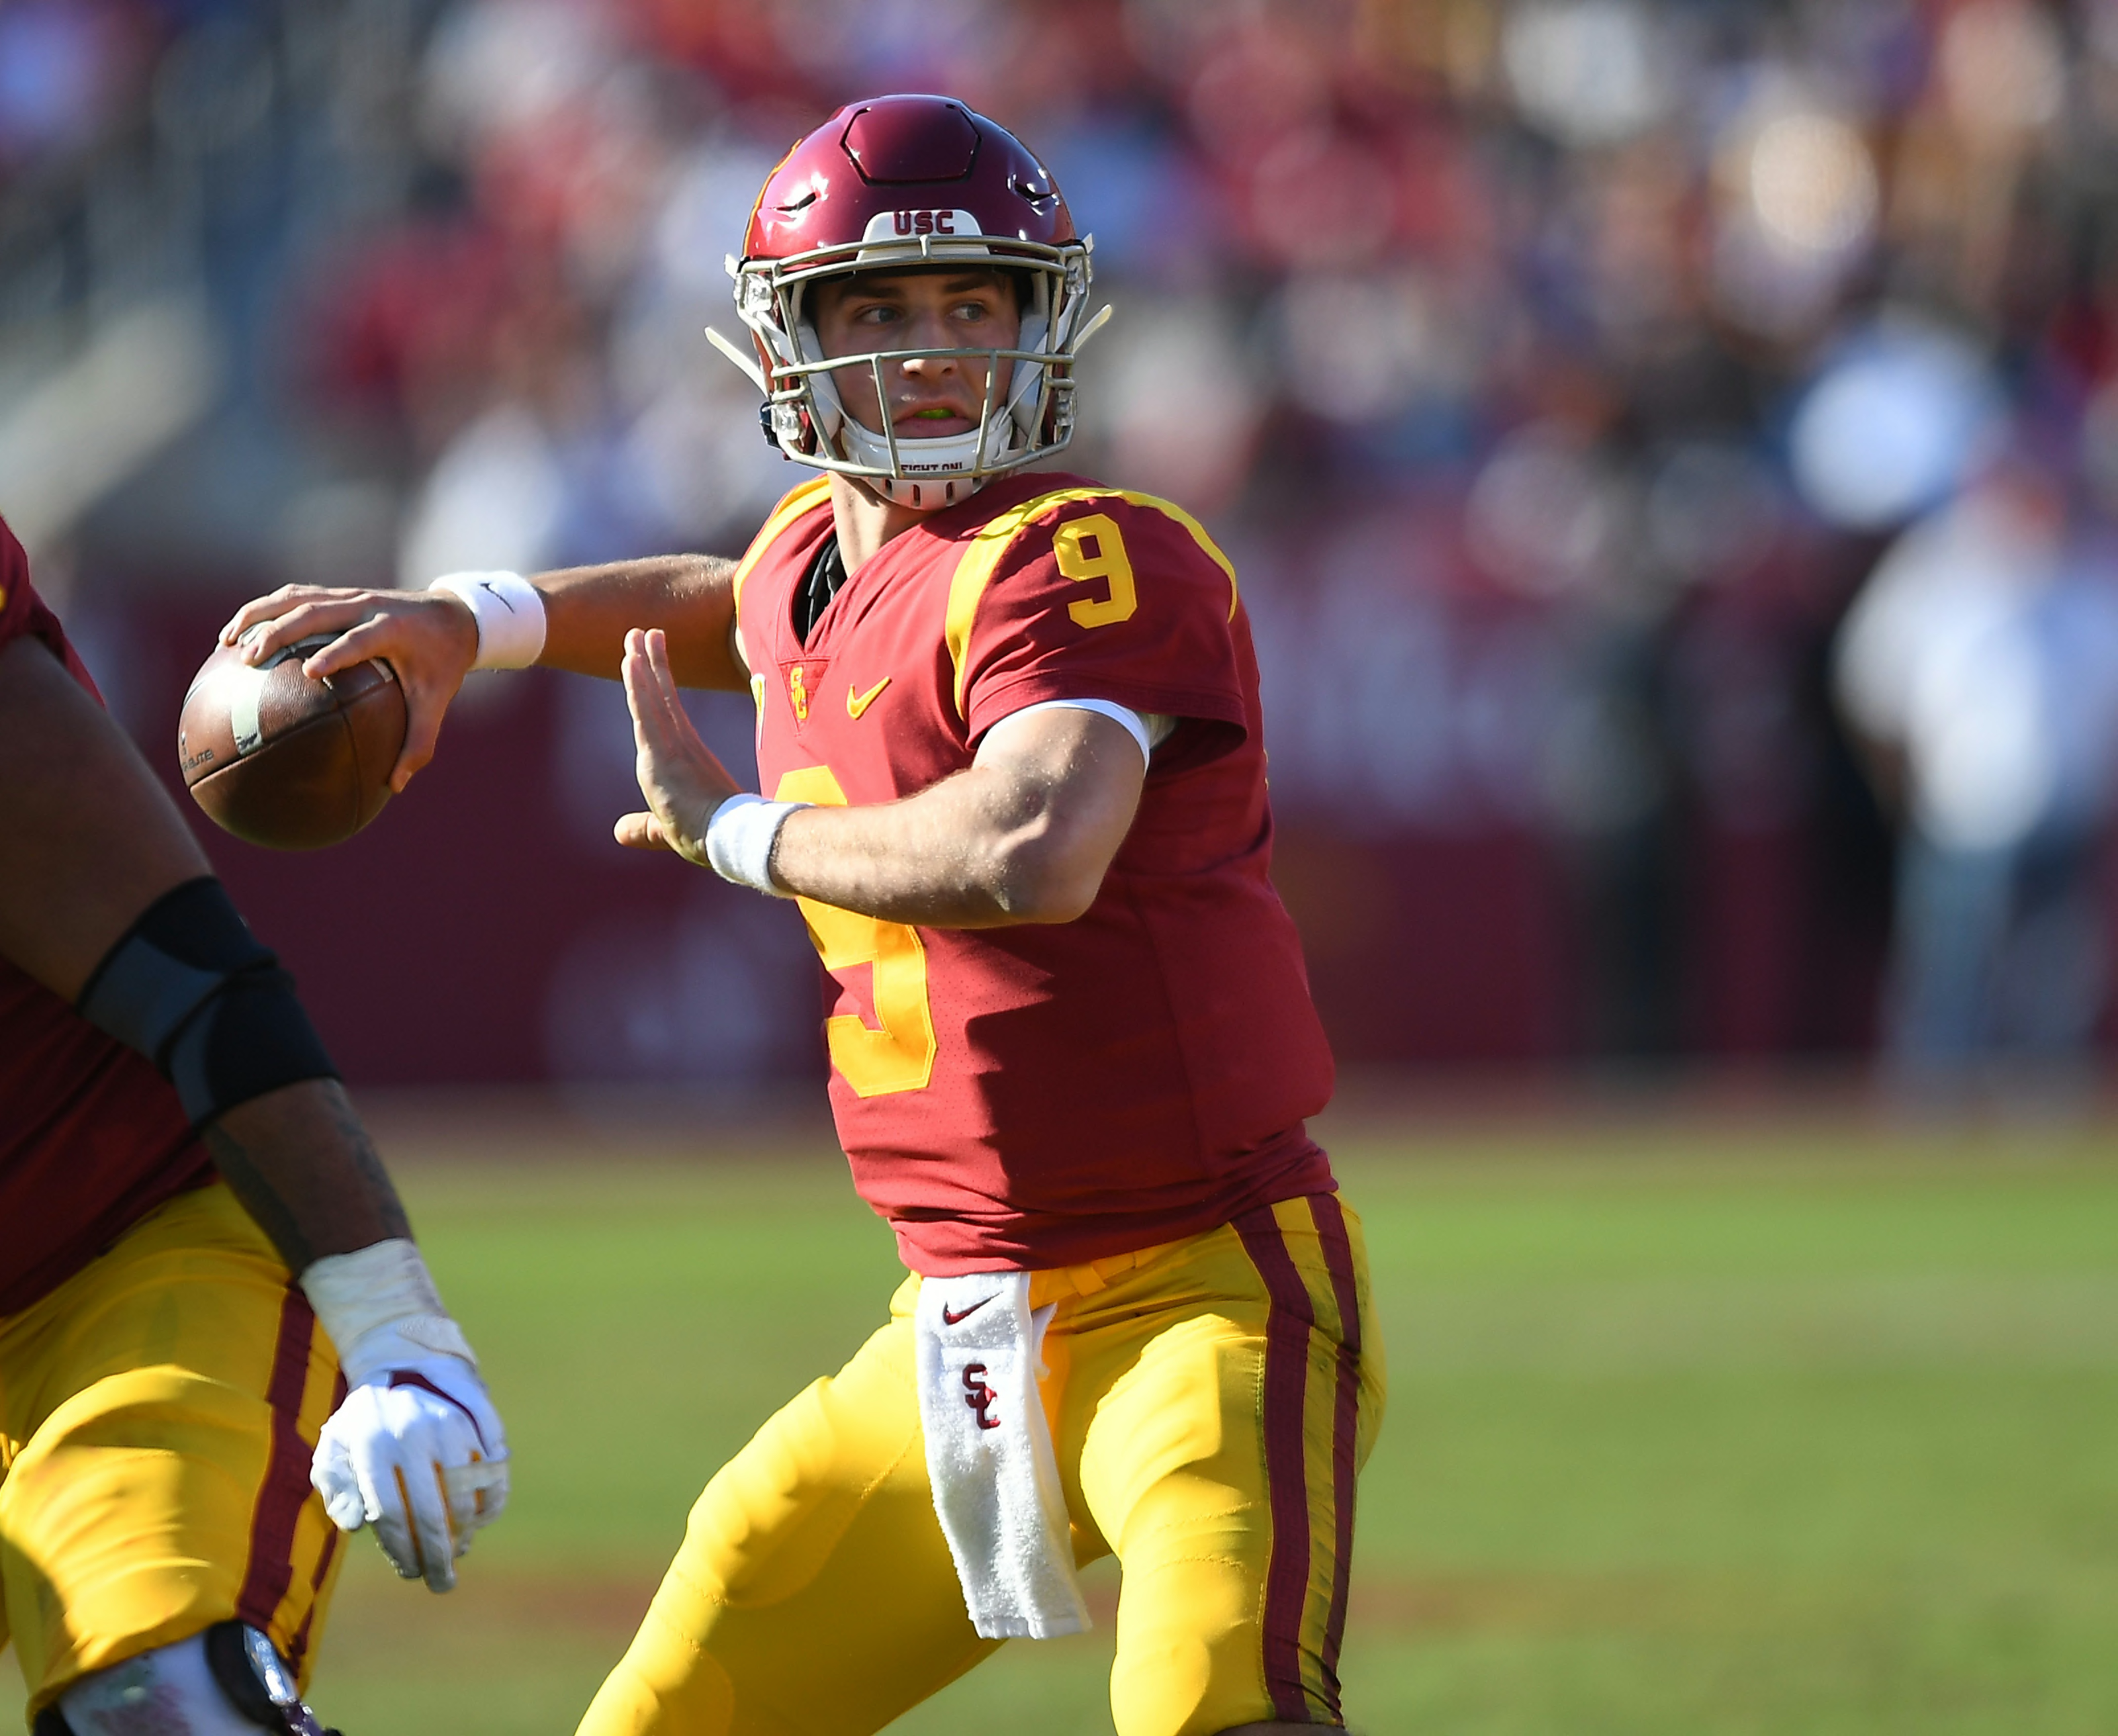 USC Football: Top 3 All-Pac-12 candidates for 2020 - Page 4